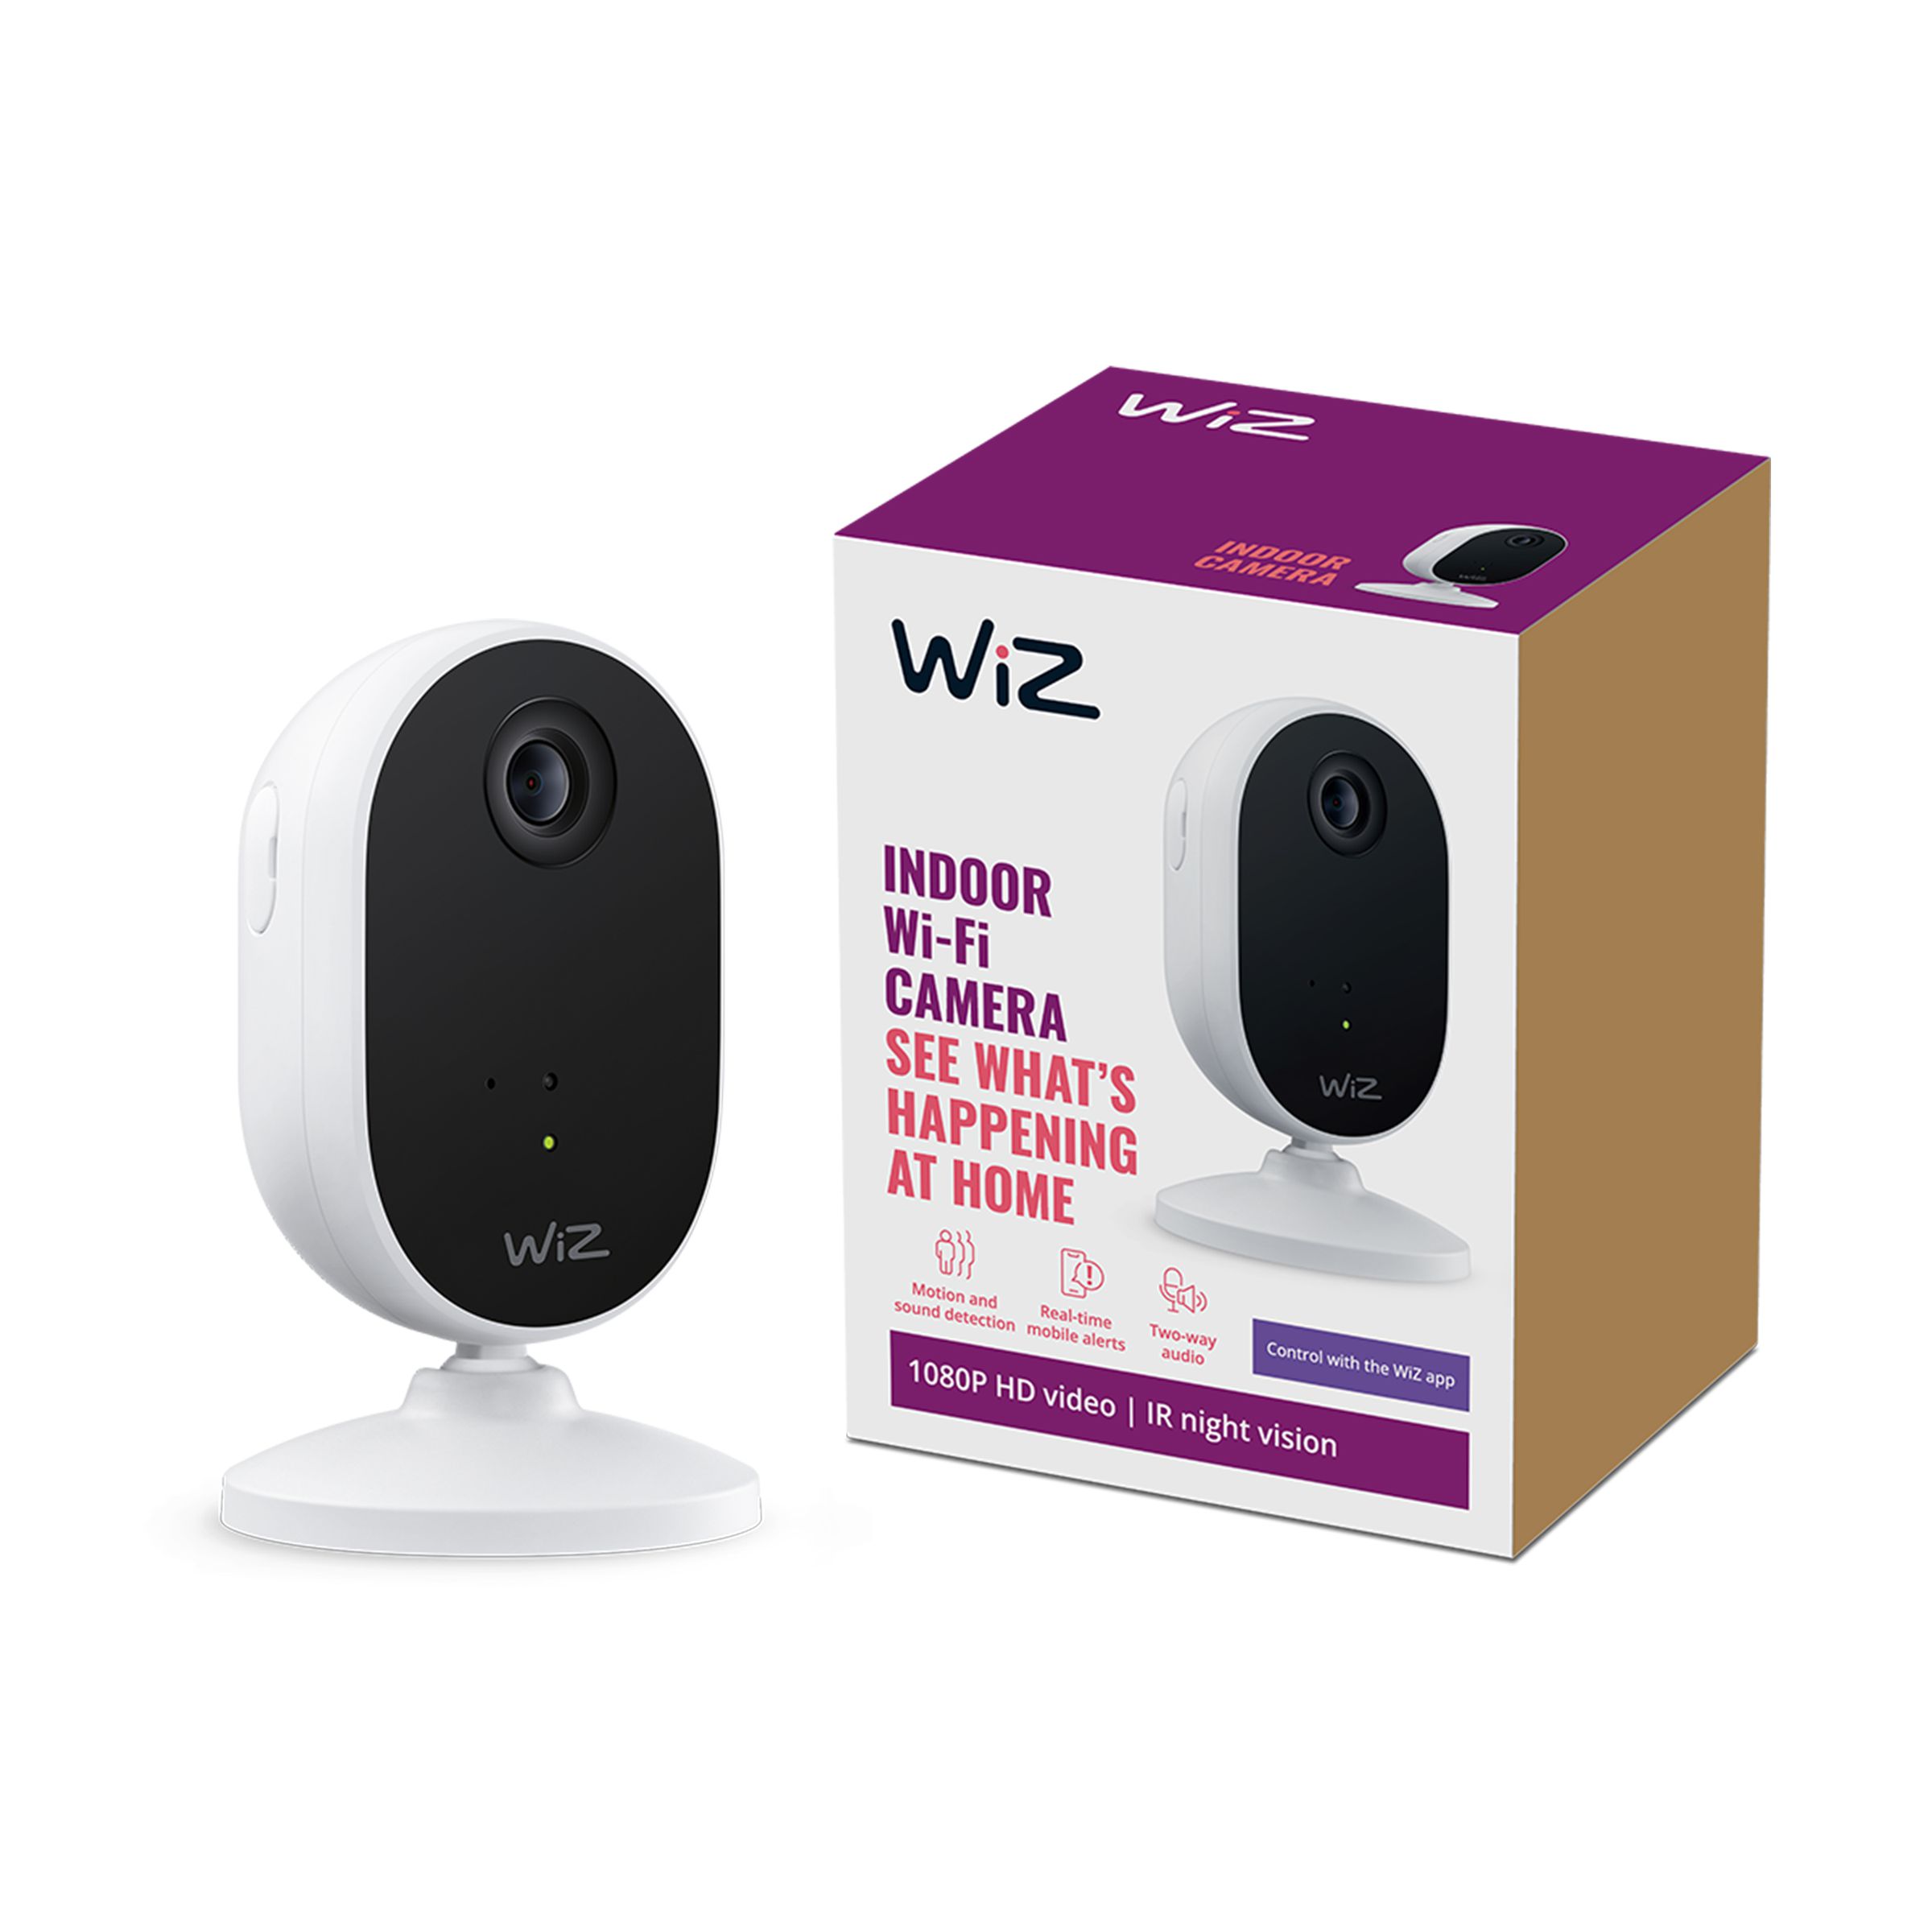 The WiZ Indoor Wi-Fi Camera works with WiZ’s smart lighting line as part of its new Home Monitoring feature.